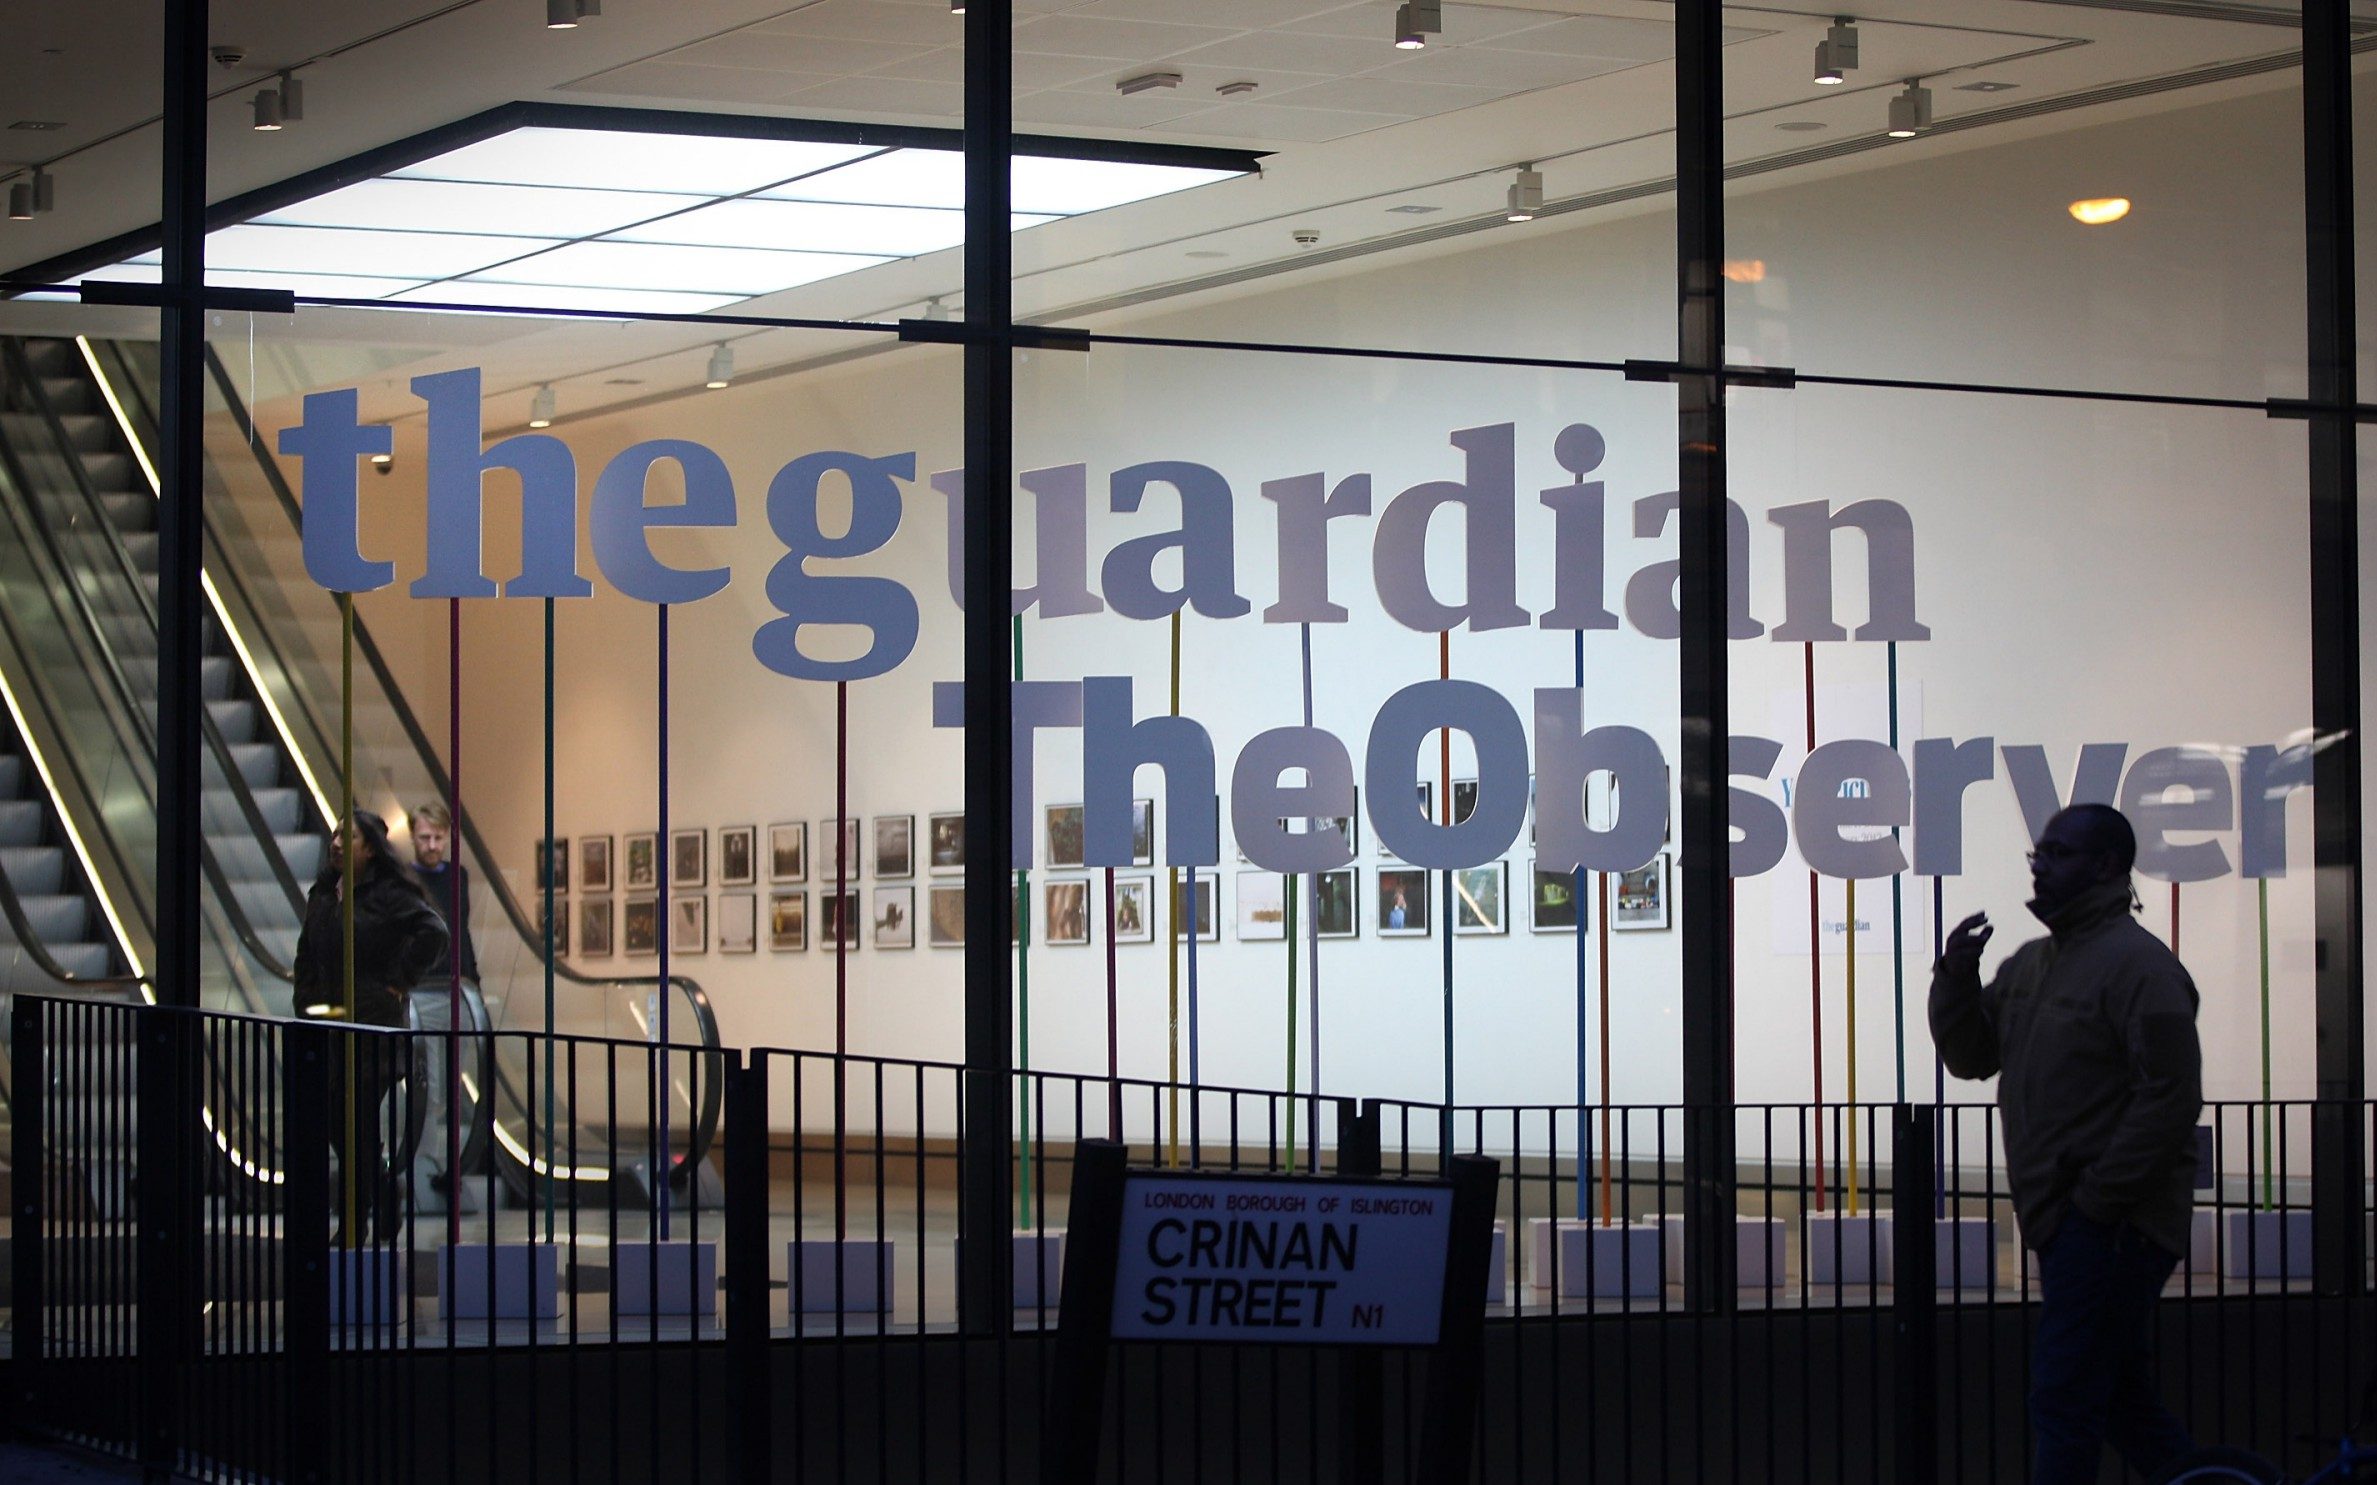 guardian to cut journalists’ jobs as it slides back into heavy losses